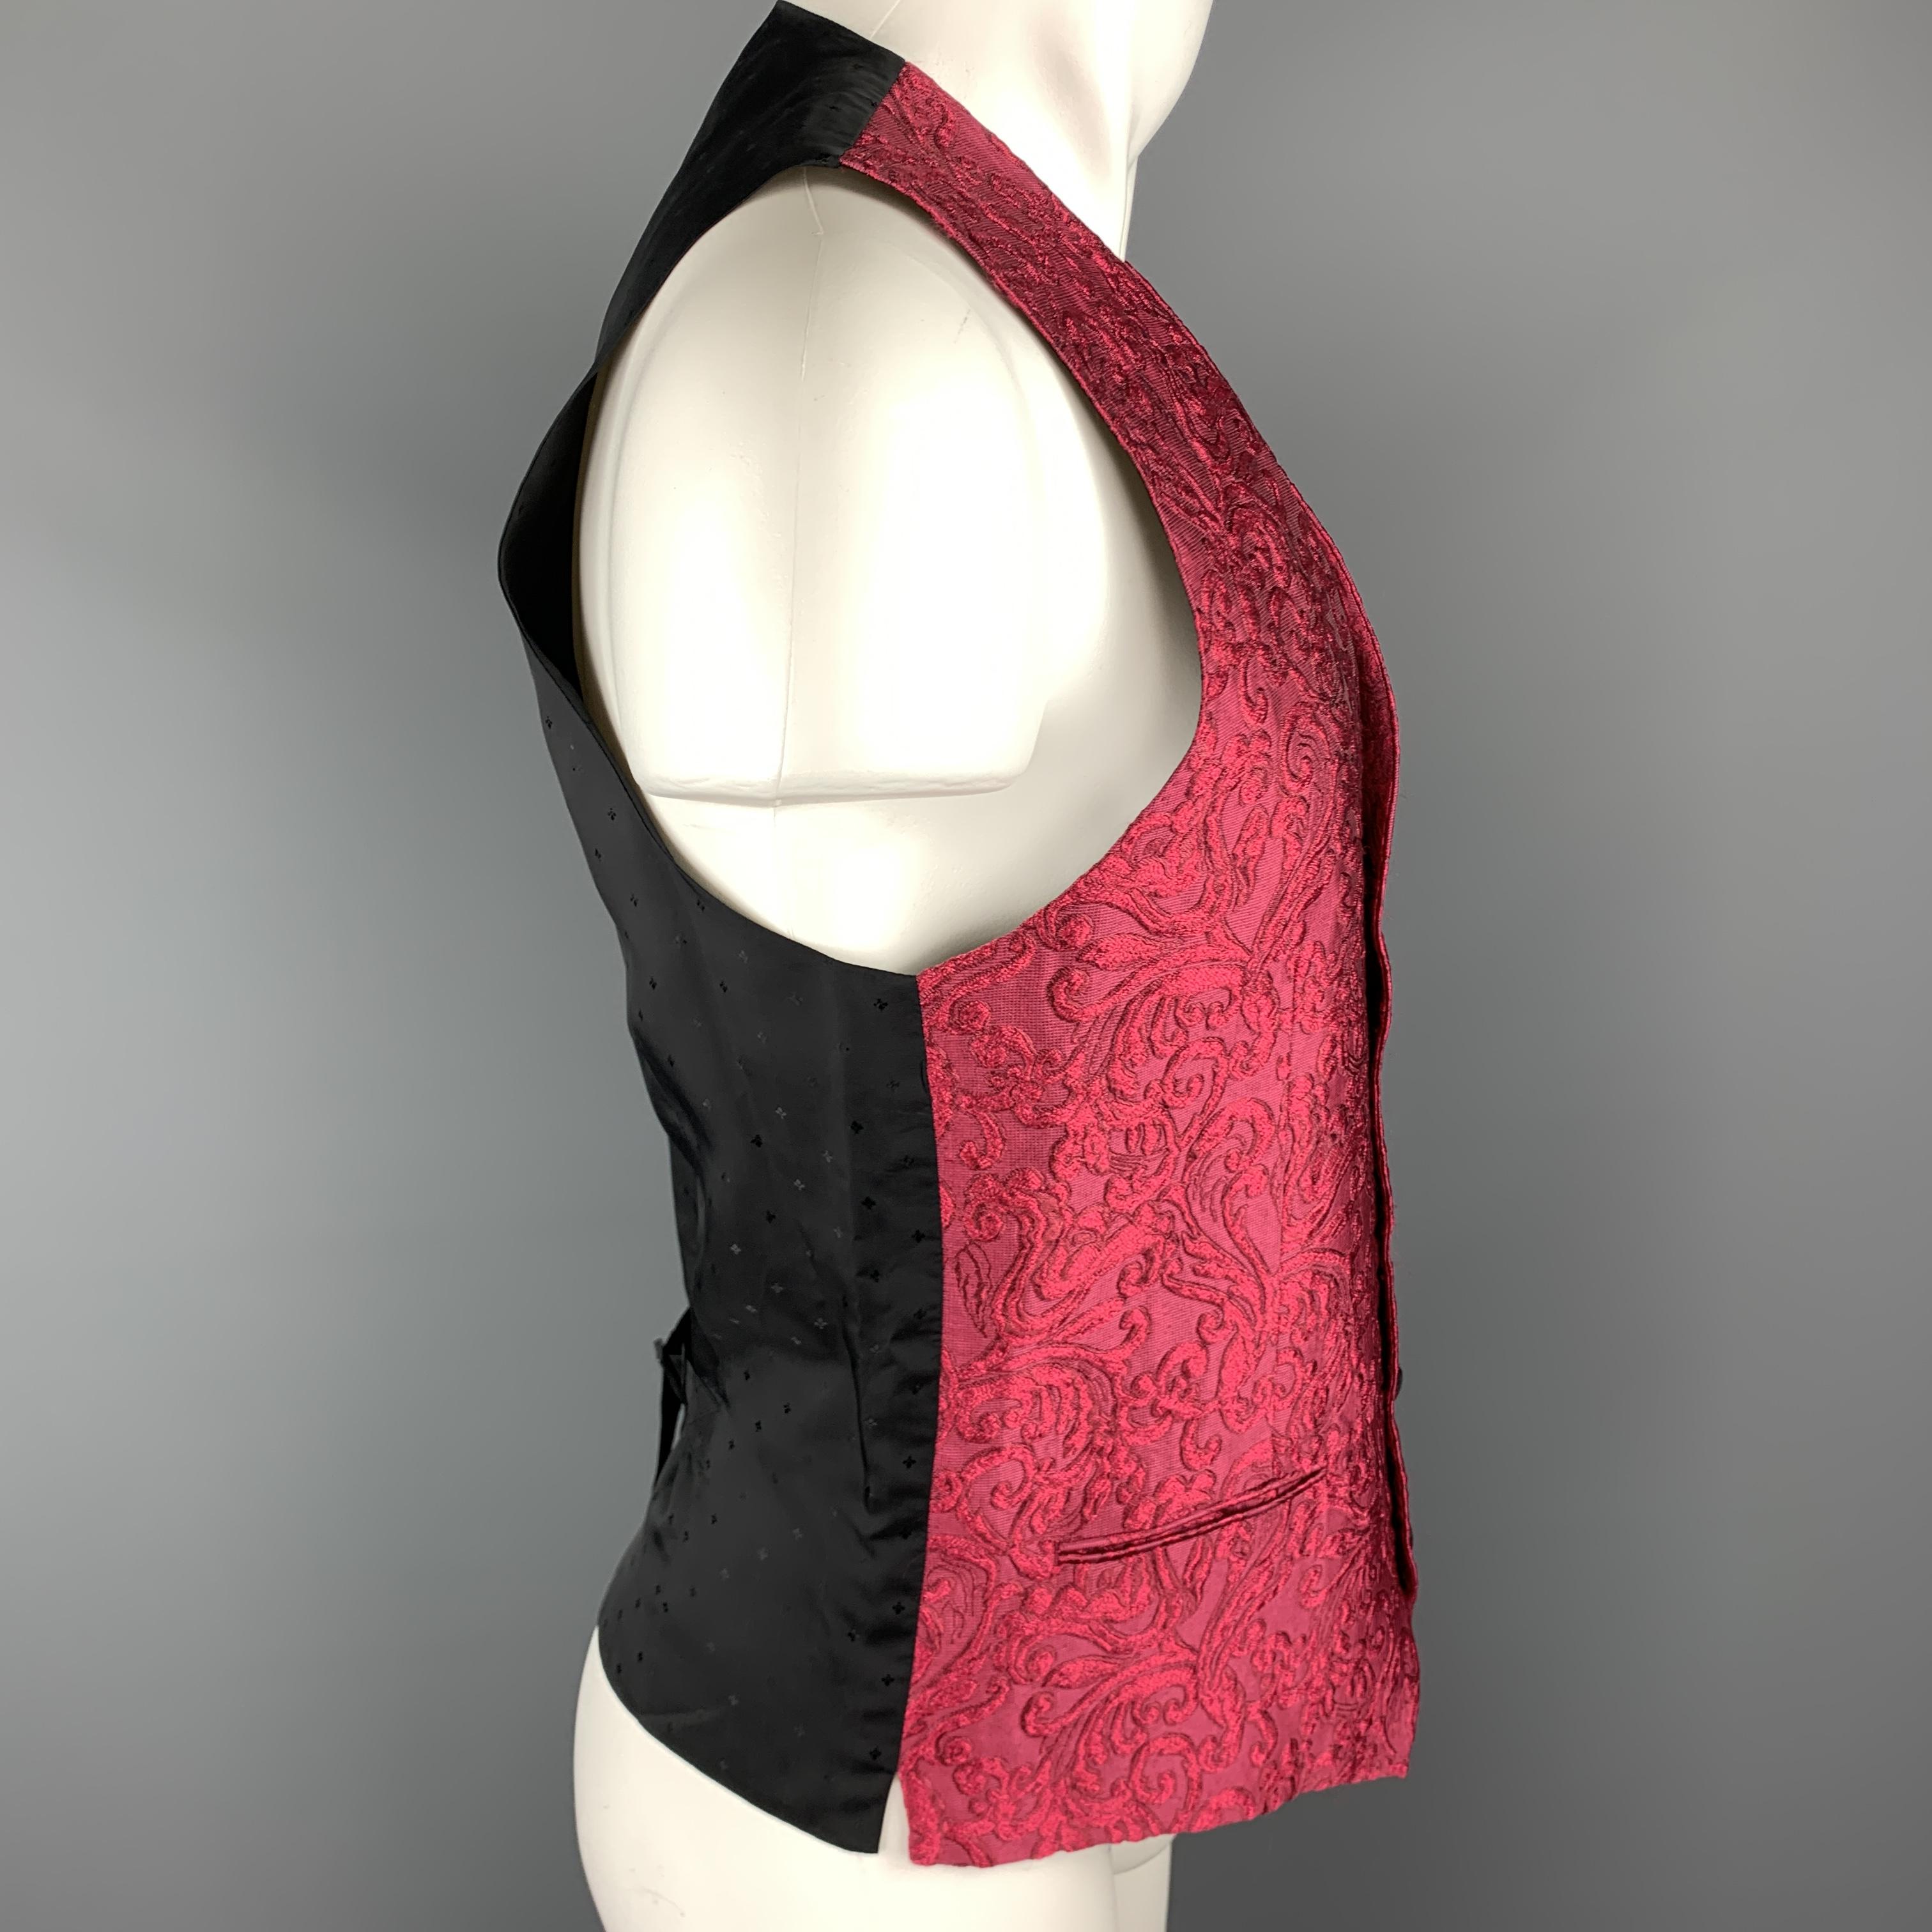 DOLCE & GABBANA vest comes in a bold raspberry fuchsia brocade with a V neck, black faille button front, and patterned satin back. Made in Italy.

Excellent Pre-Owned Condition.
Marked: IT 48

Measurements:

Shoulder: 13 in.
Chest: 38 in.
Length: 26